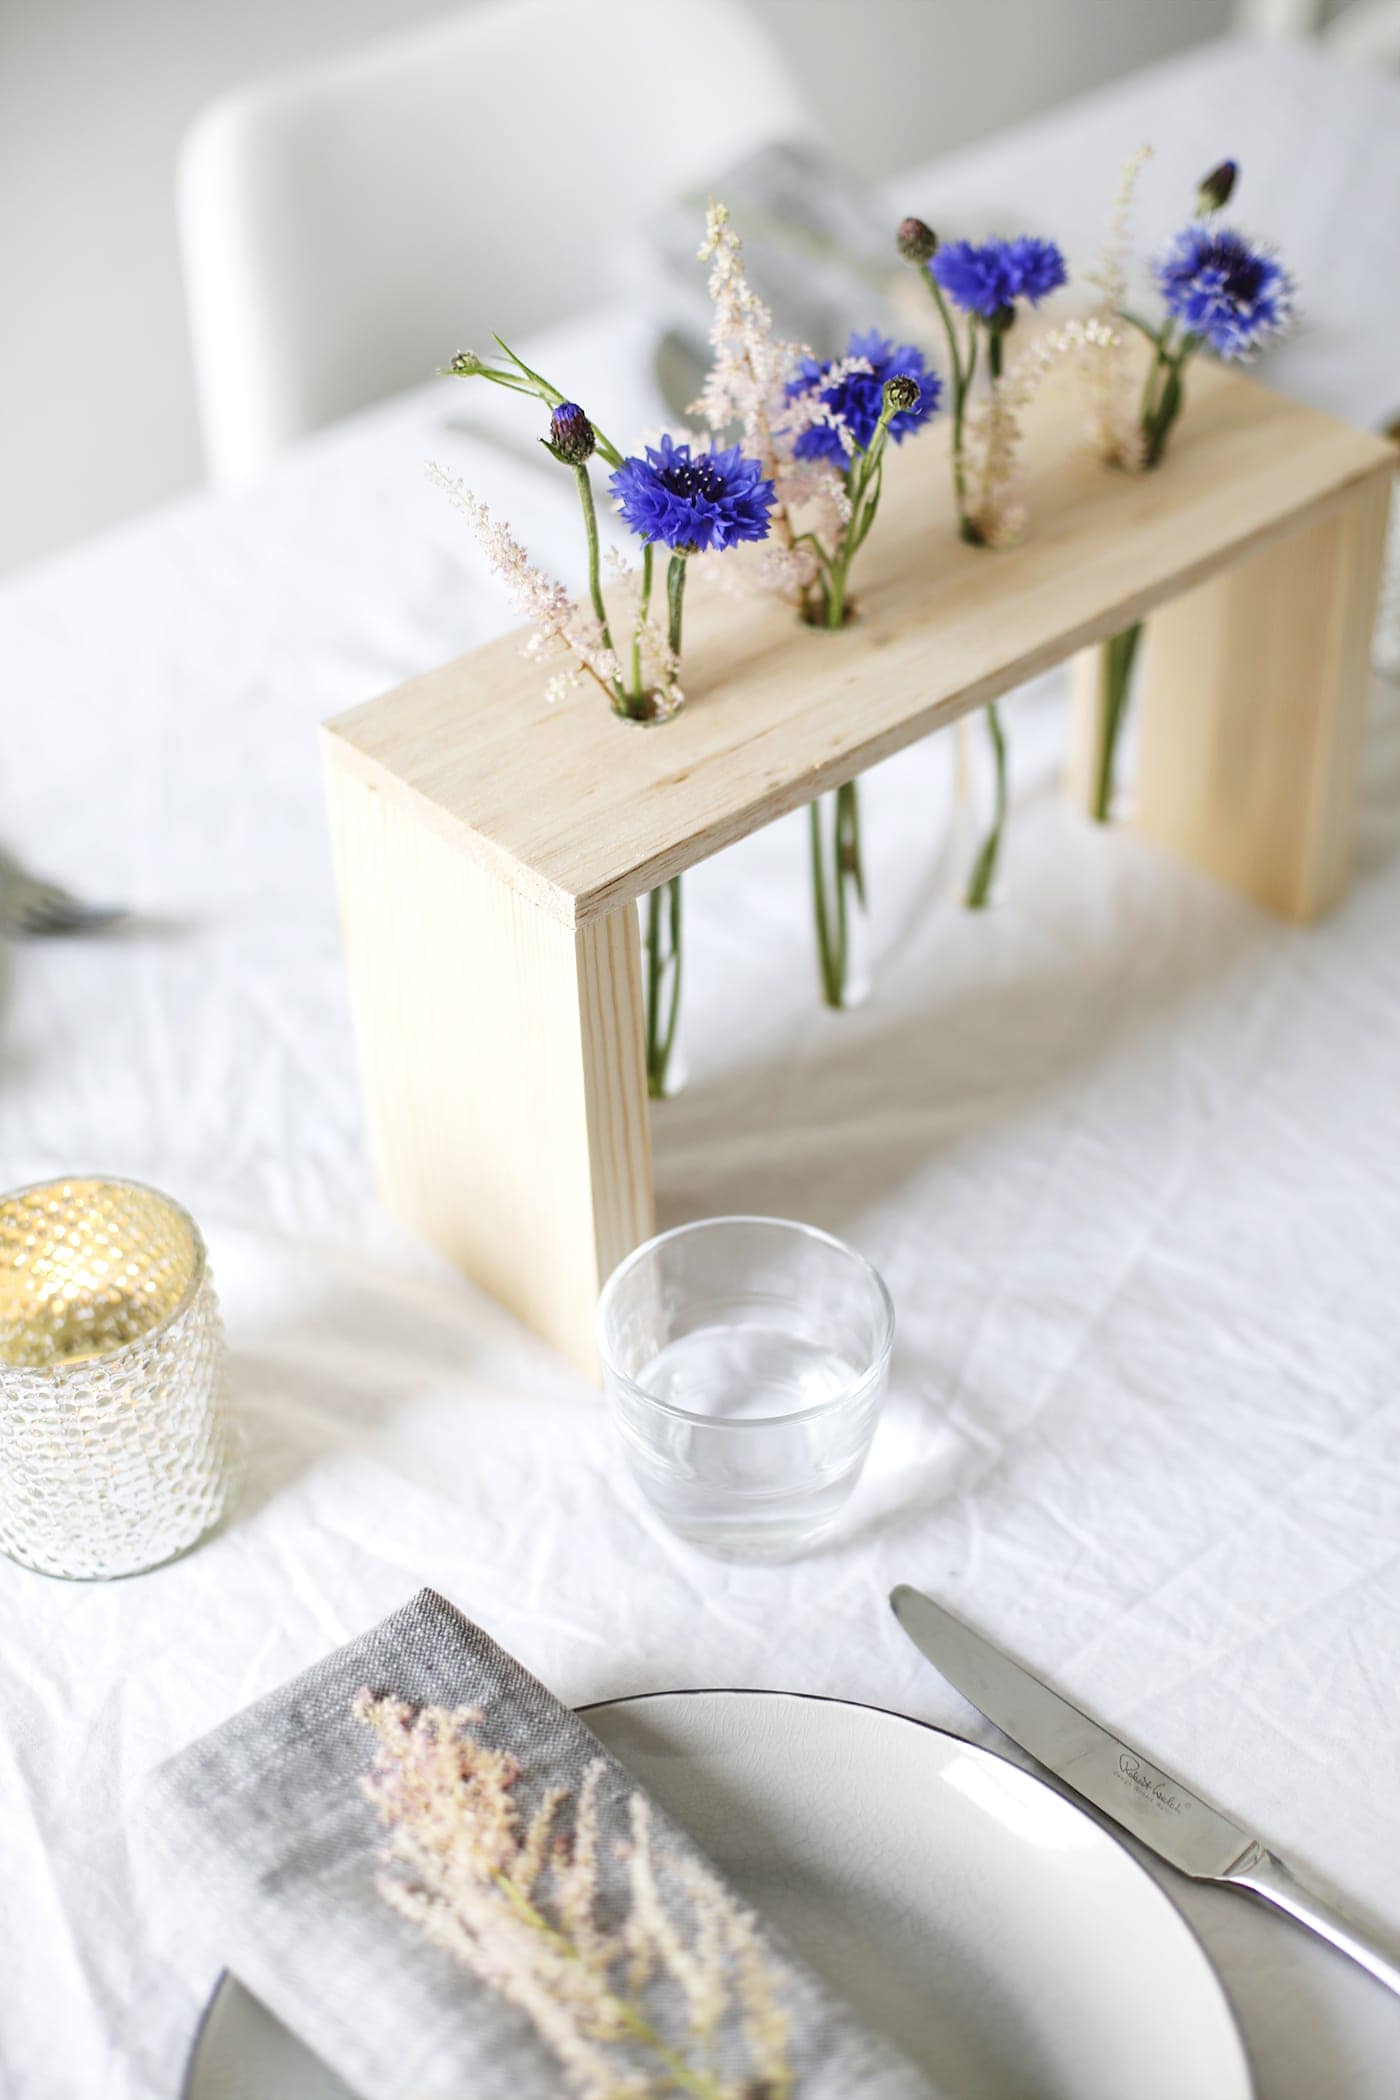 DIY floral table centre made with wood and test tubes | easy craft tutorial perfect for entertaining | home tutorial ideas